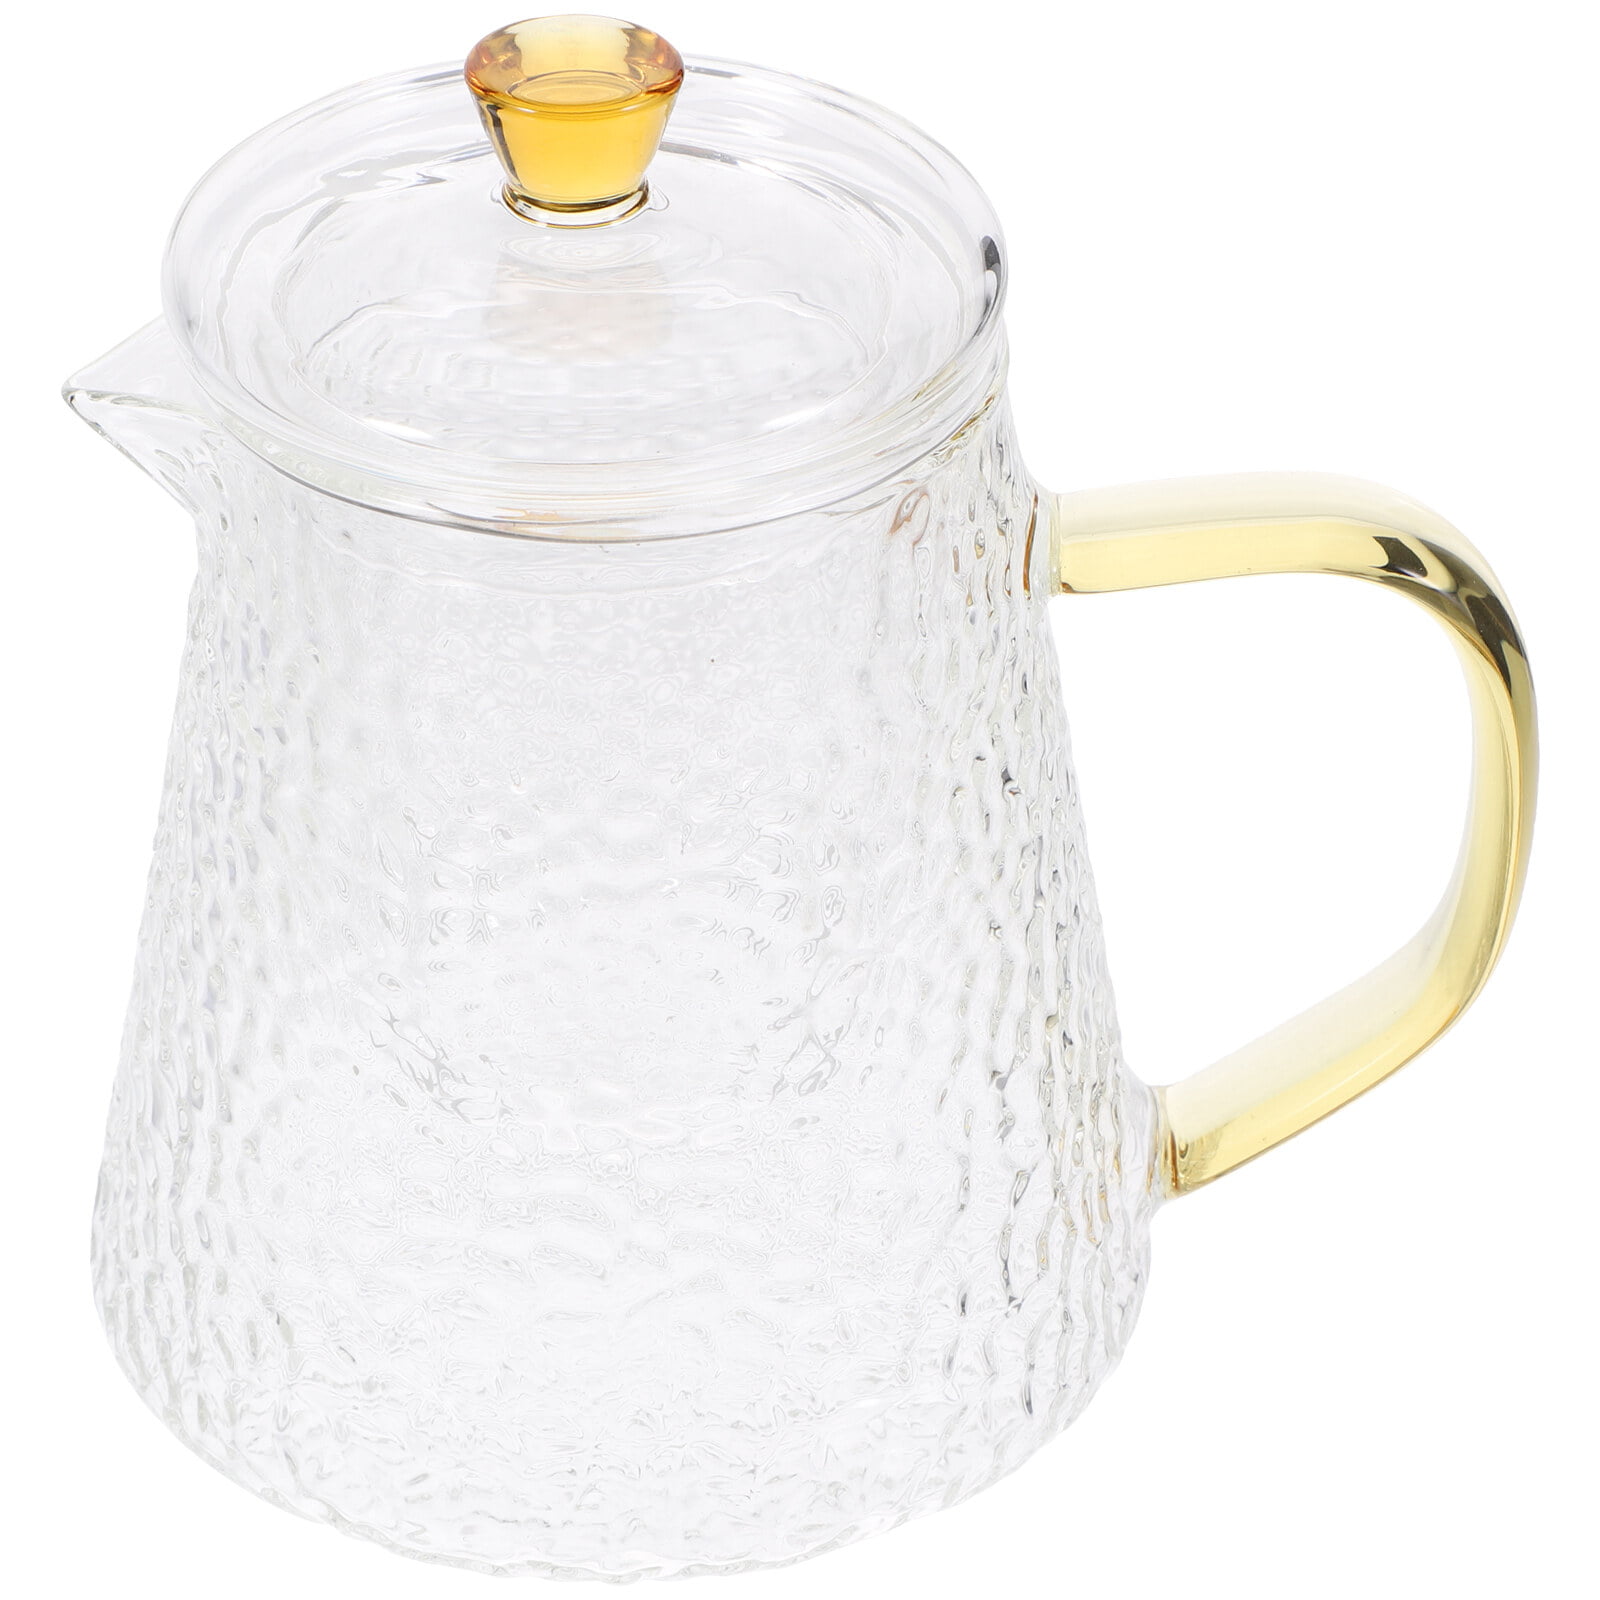 Luvan 44oz Clear Glass TeapotGlass Teapot with Stainless Steel Infuser, Size: Small